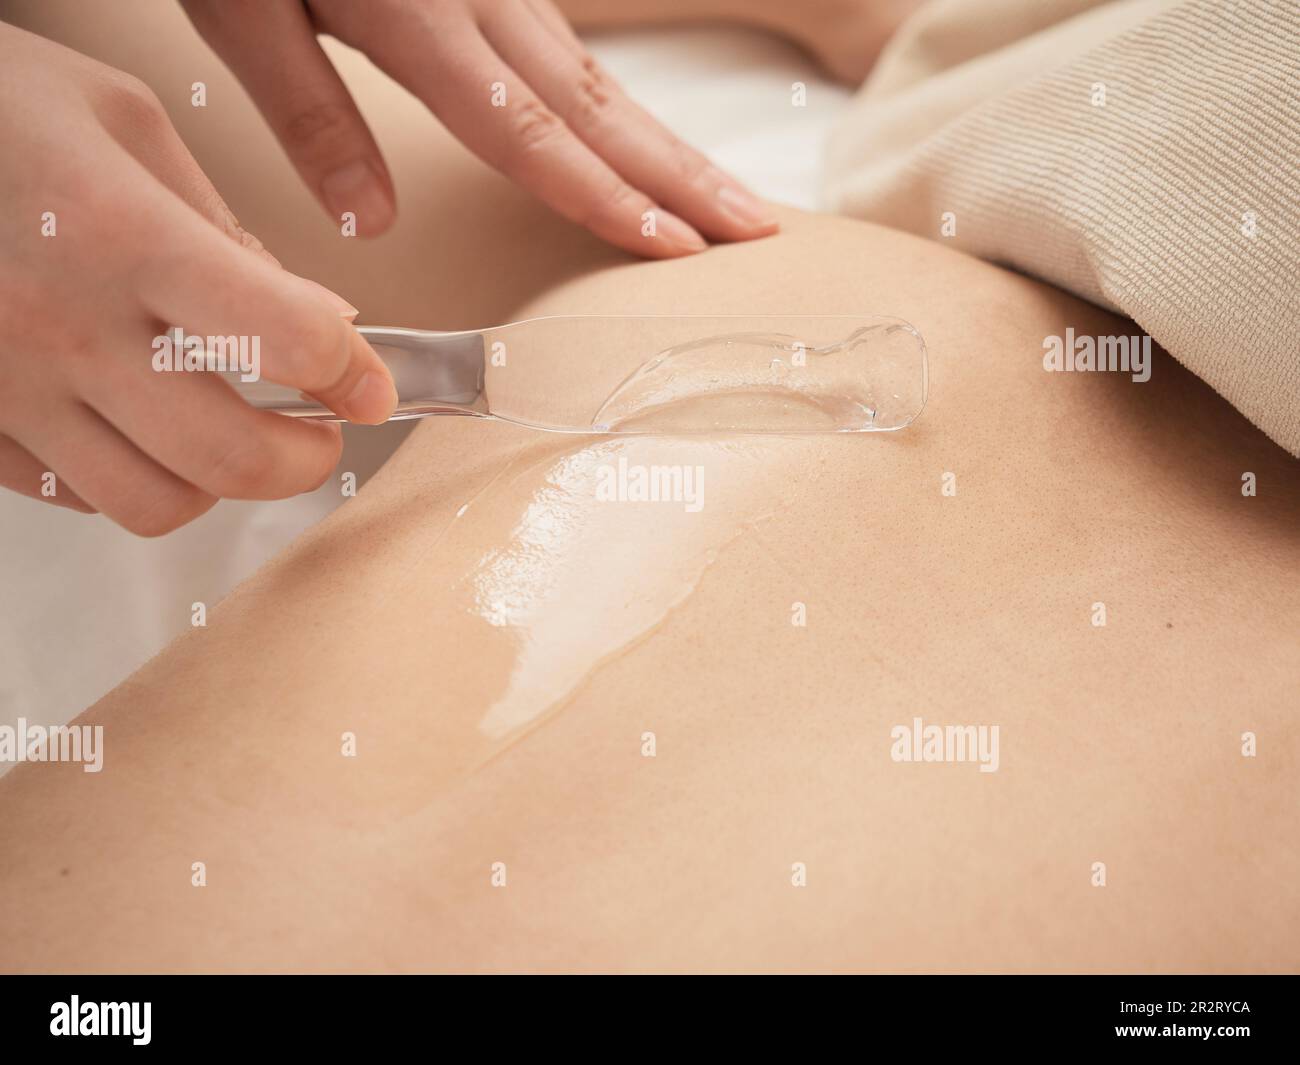 Image of Japanese Women's Hair Removal Stock Photo